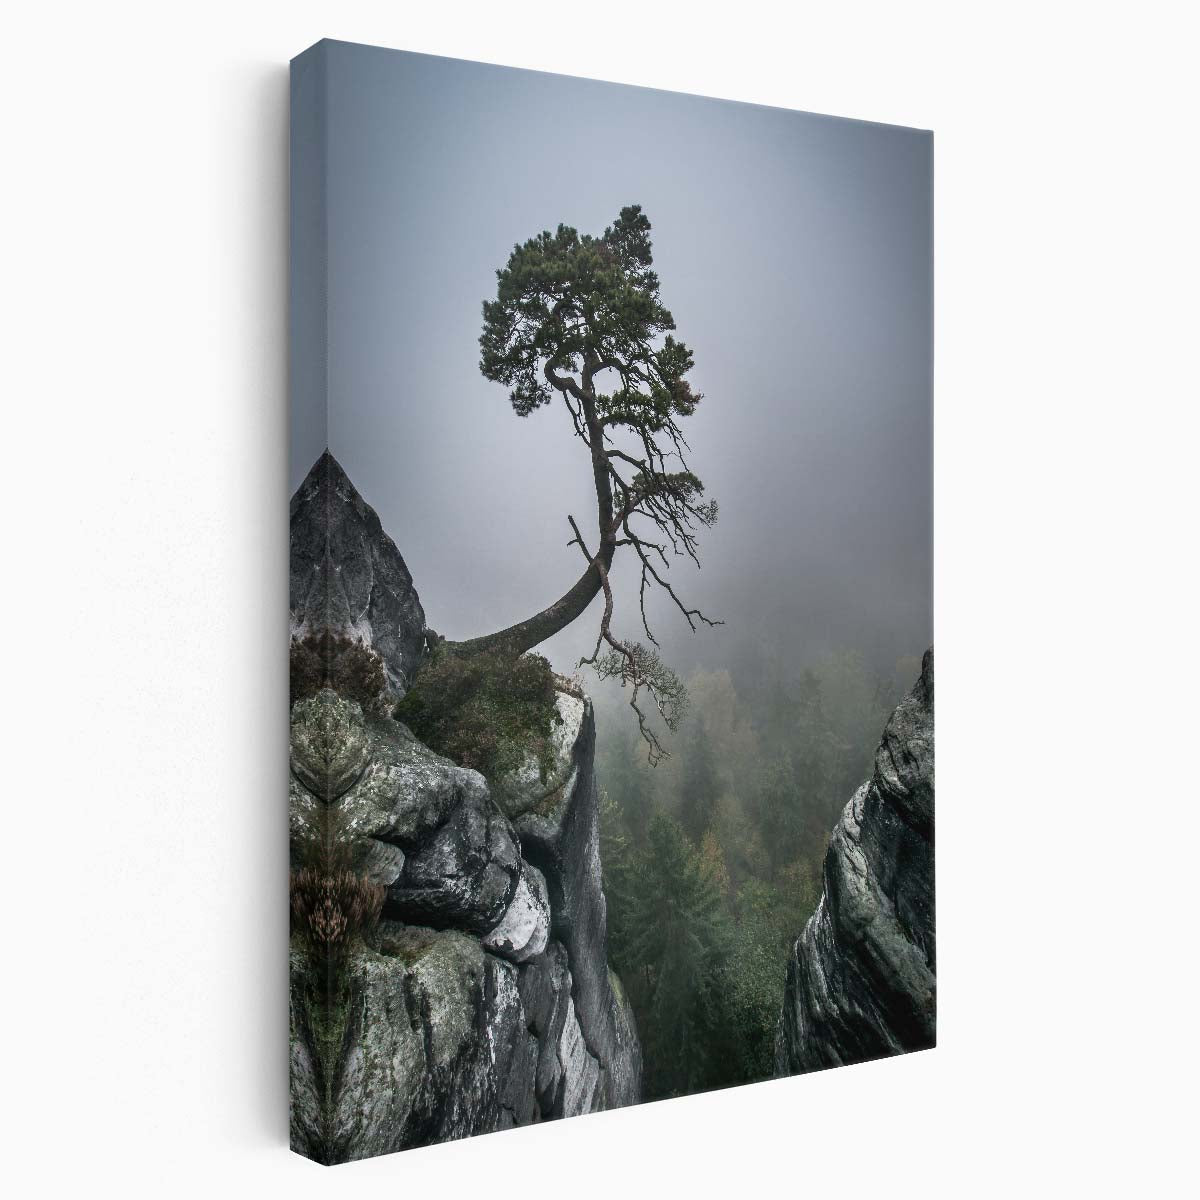 Lonely Bonsai Tree on Cliffside, Foggy Swiss-German Landscape Photography by Luxuriance Designs, made in USA